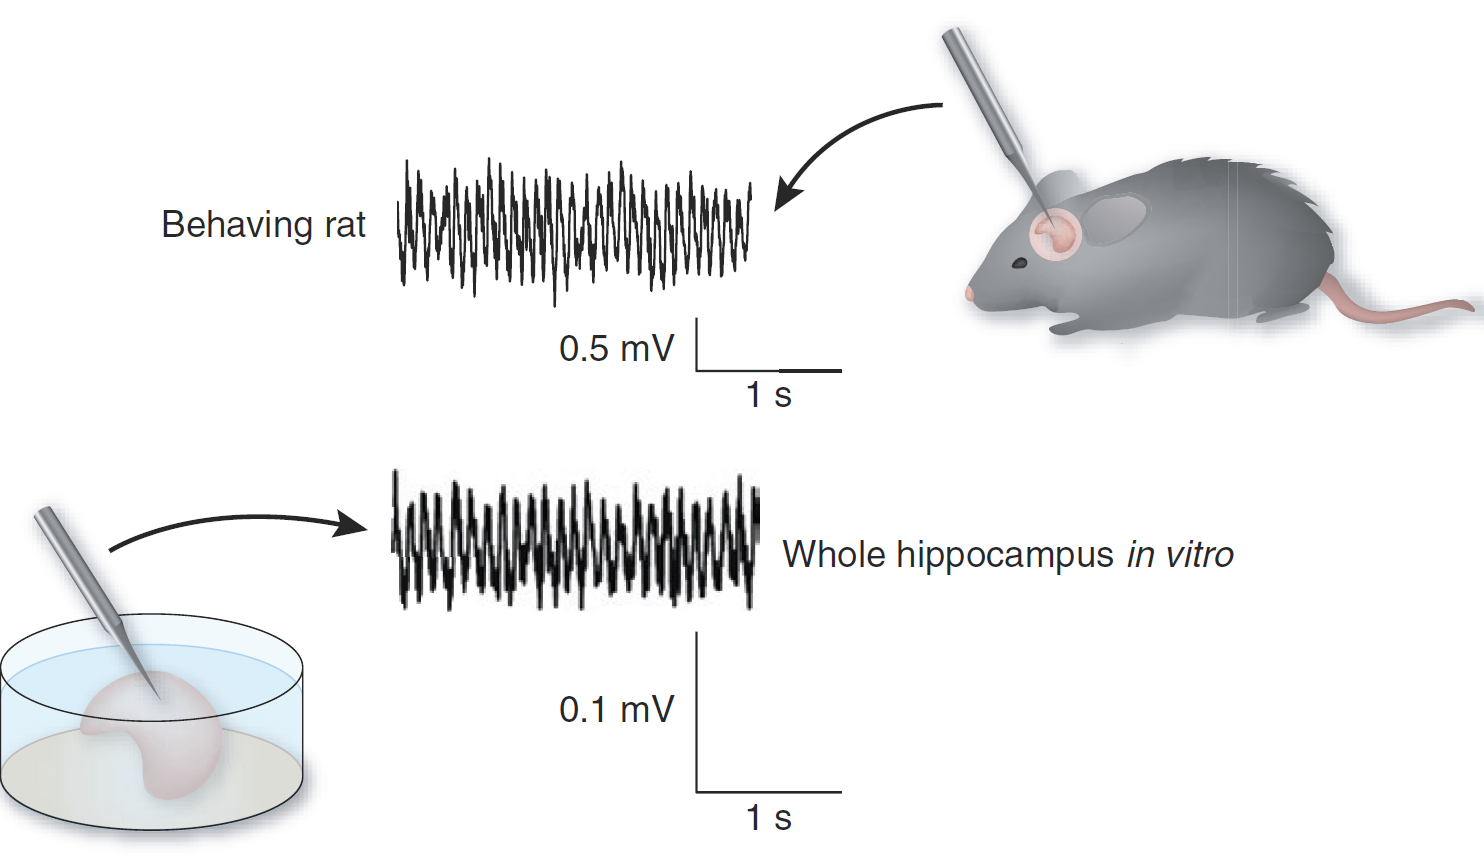 Diagram showing the theta recorded from the complete hippocampus in vitro and that recorded in vivo showing the surprising resemblance in the signal (adapted from Colgin and Moser’s News and Views in Nature Neuroscience, 2009)